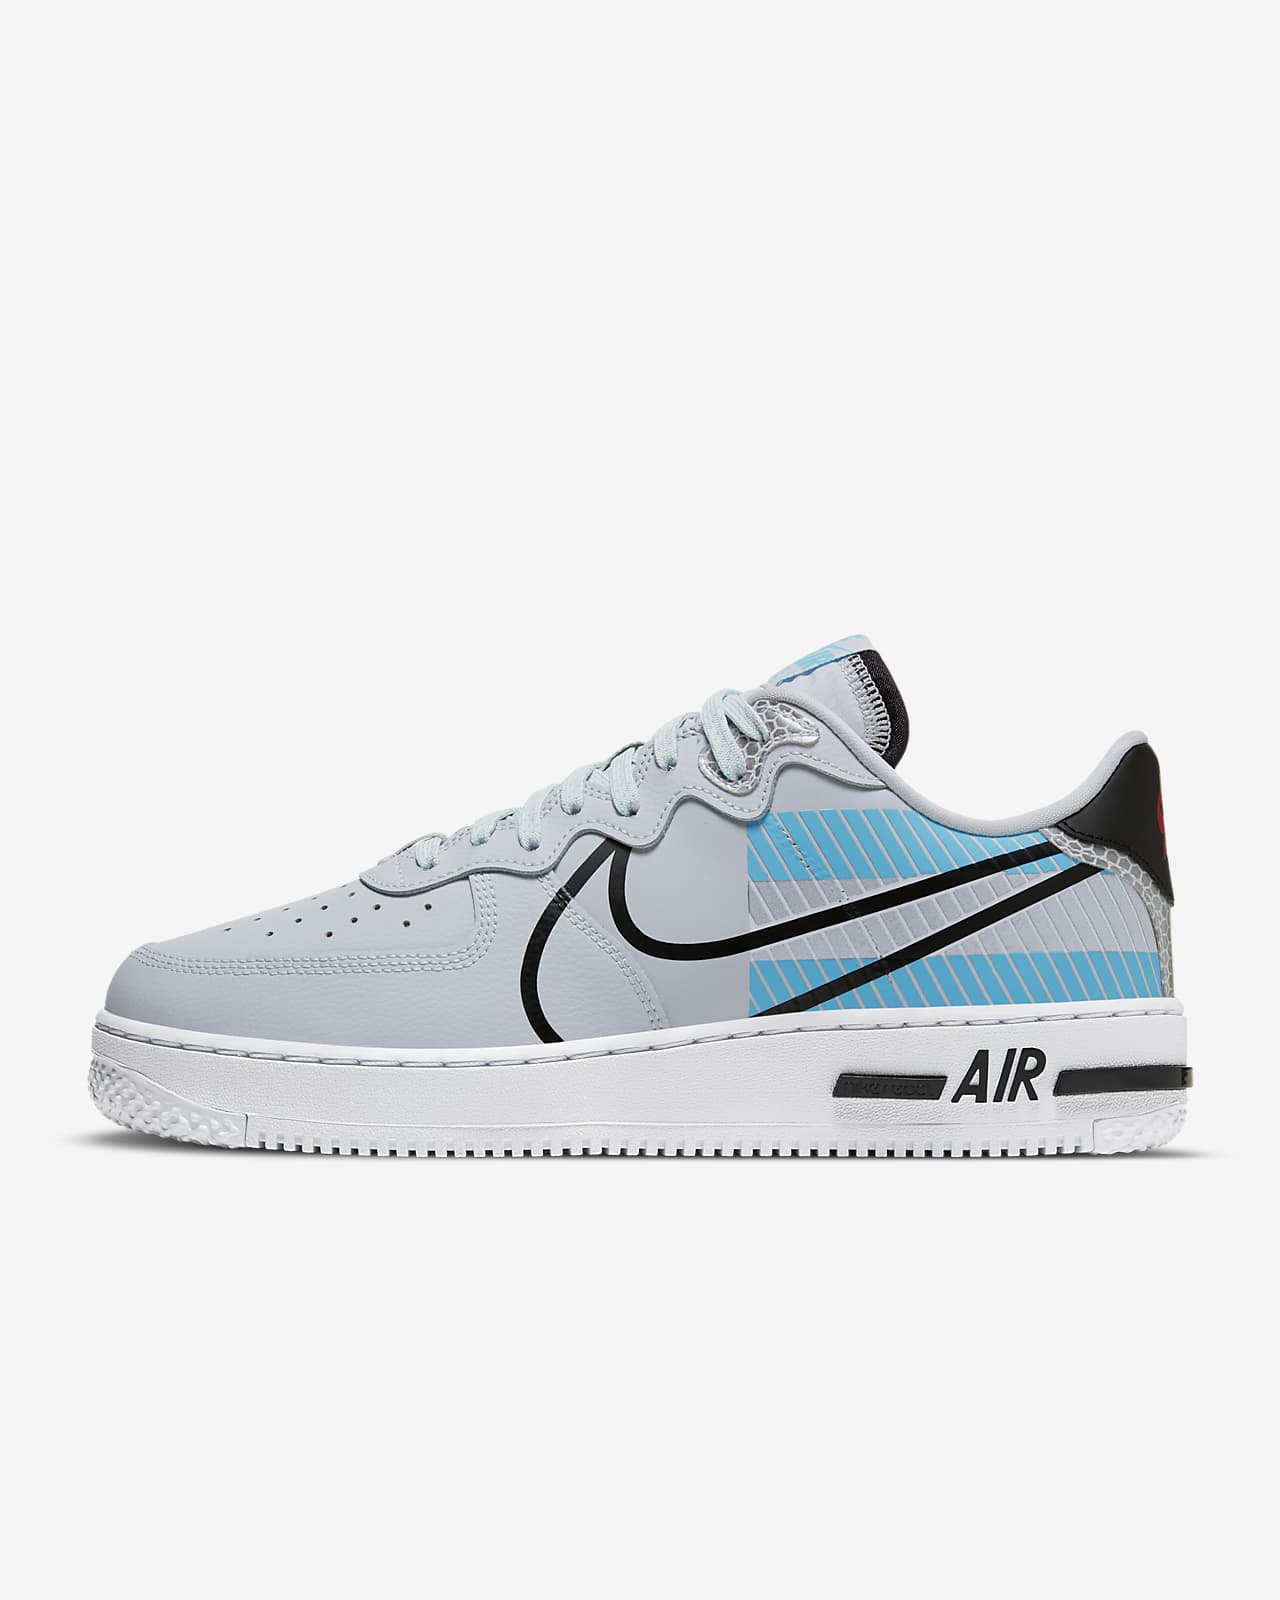 air force one nike personalizzate